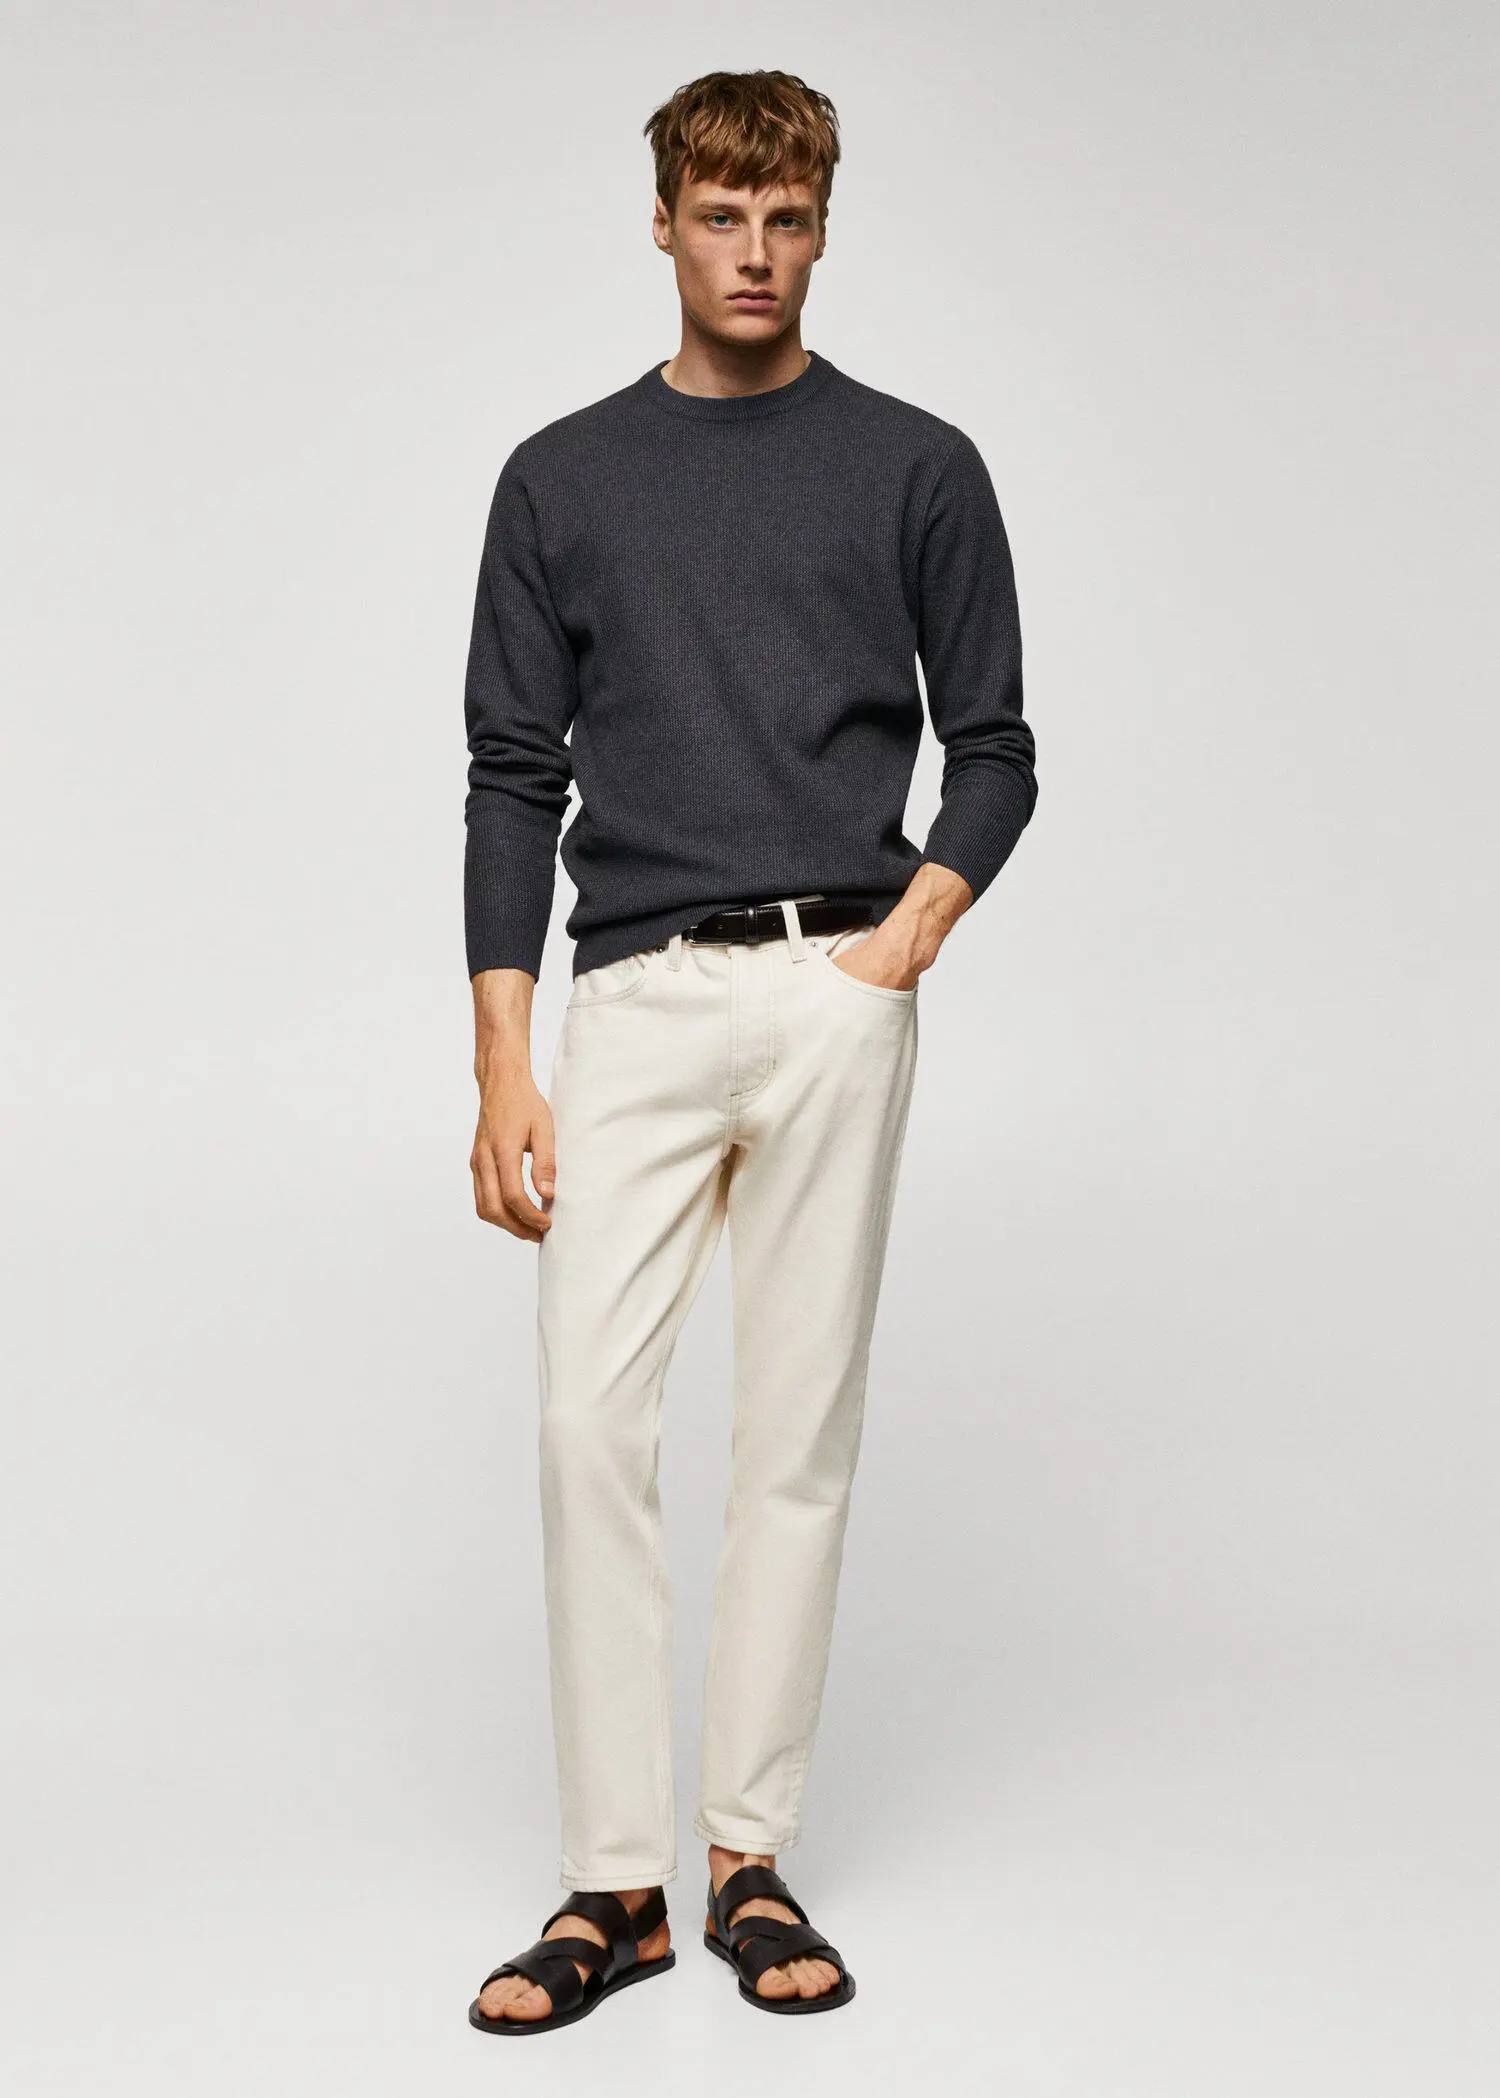 Mango Structured cotton sweater. a man in a black sweater and white pants. 